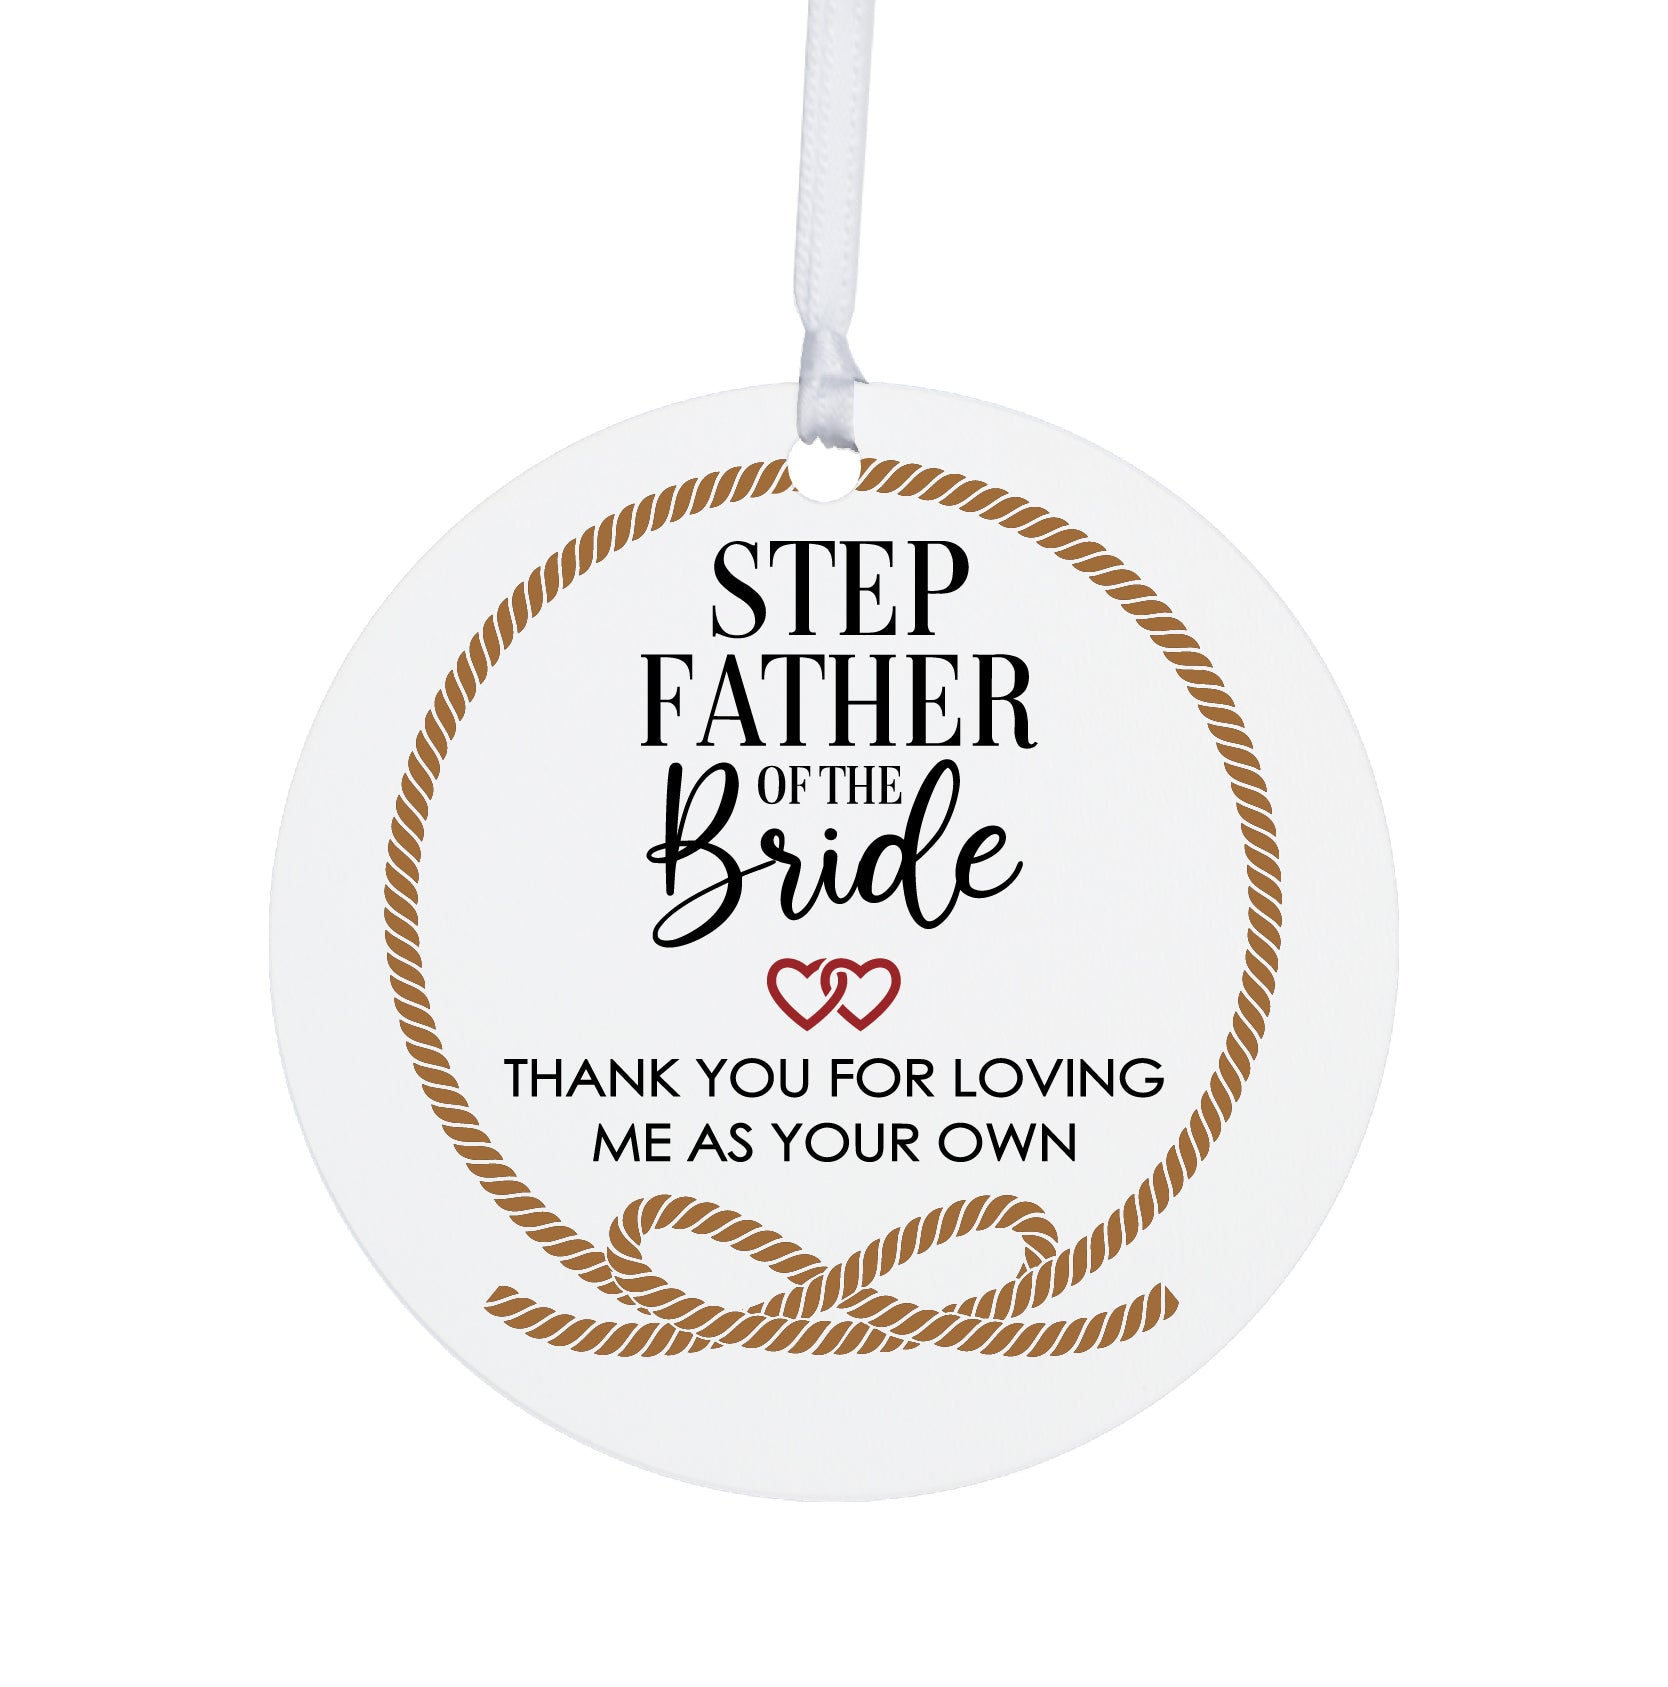 Stepdads White Ornament With Inspirational Message Gift Ideas - Step Father Of The Bride - LifeSong Milestones